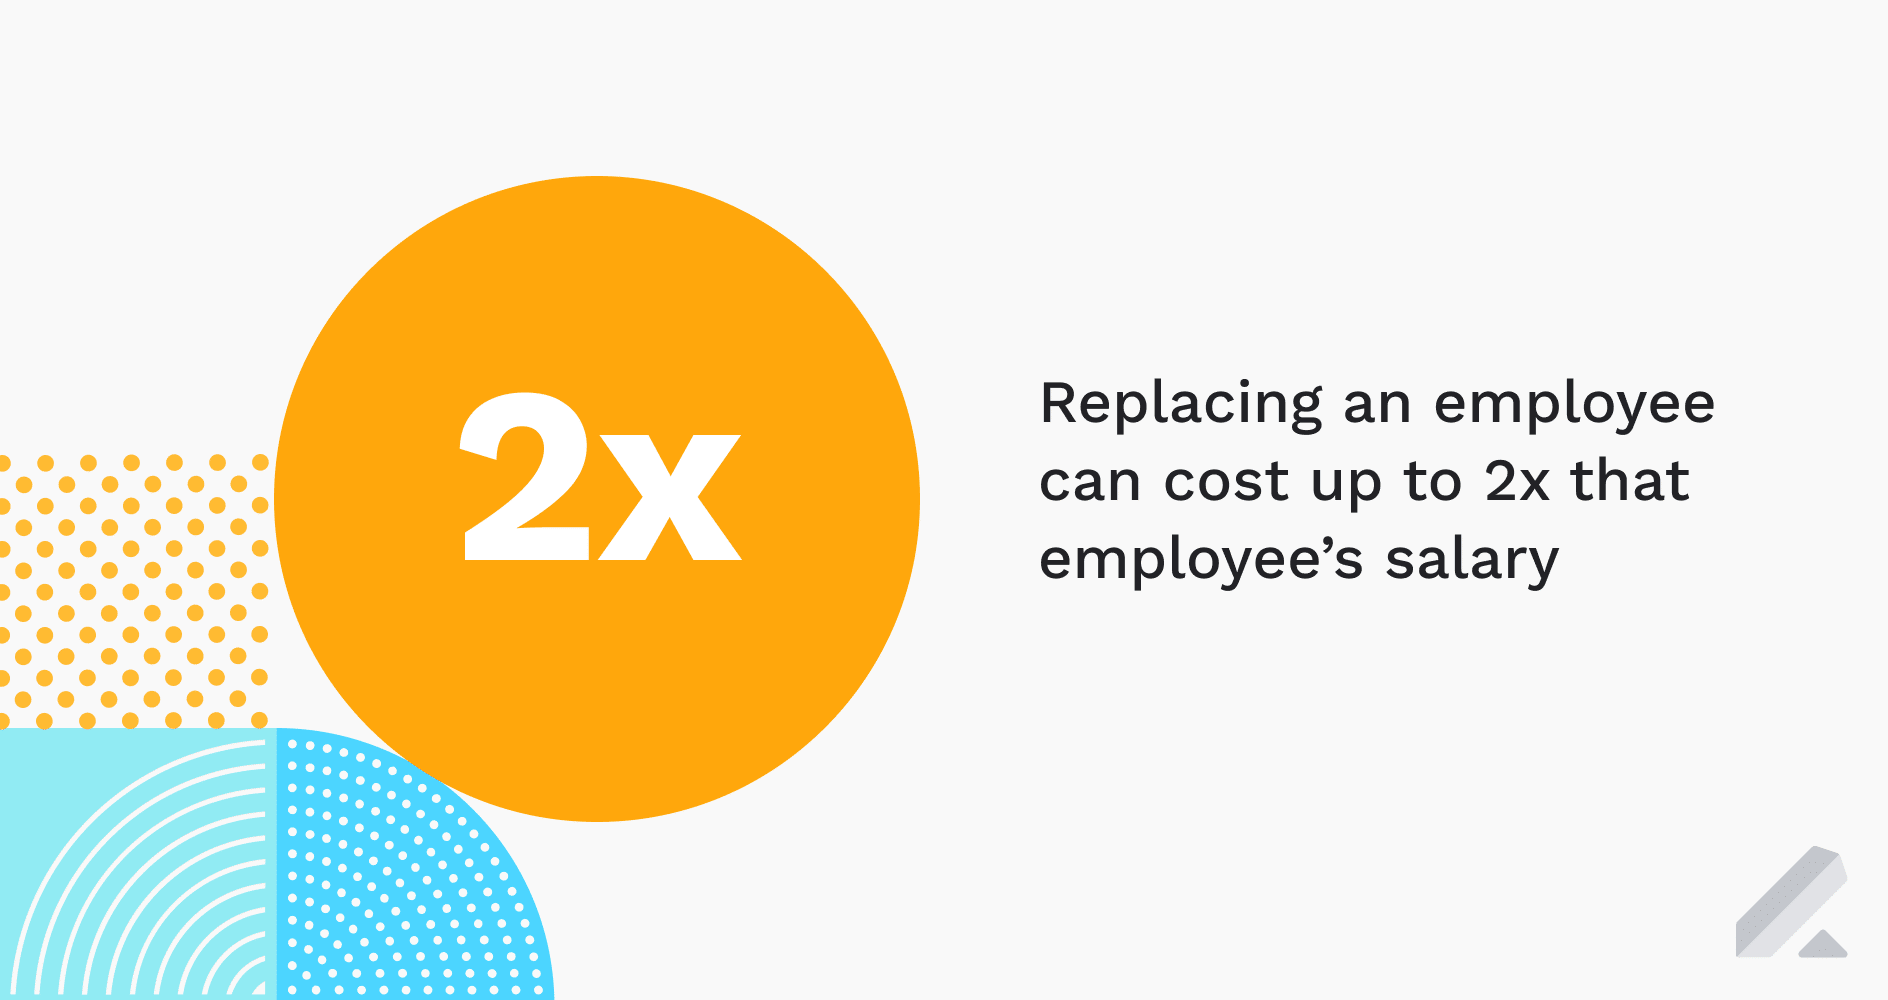 Replacing an employee can cost up to 2x that employee's salary